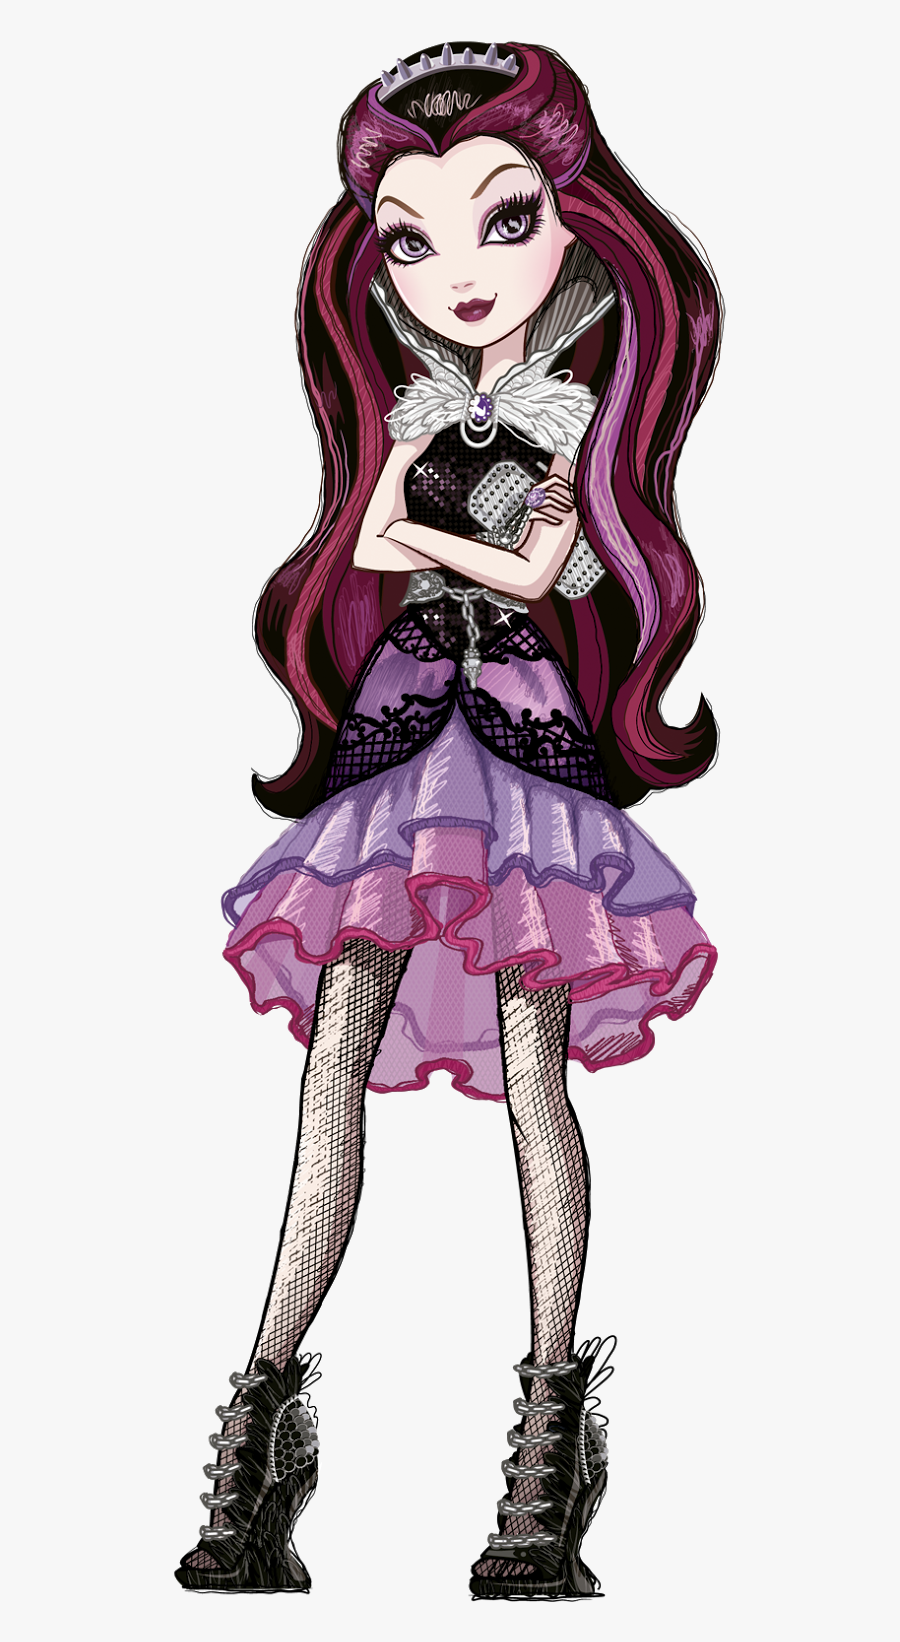 Raven-queen - Raven Queen Ever After High Characters, Transparent Clipart